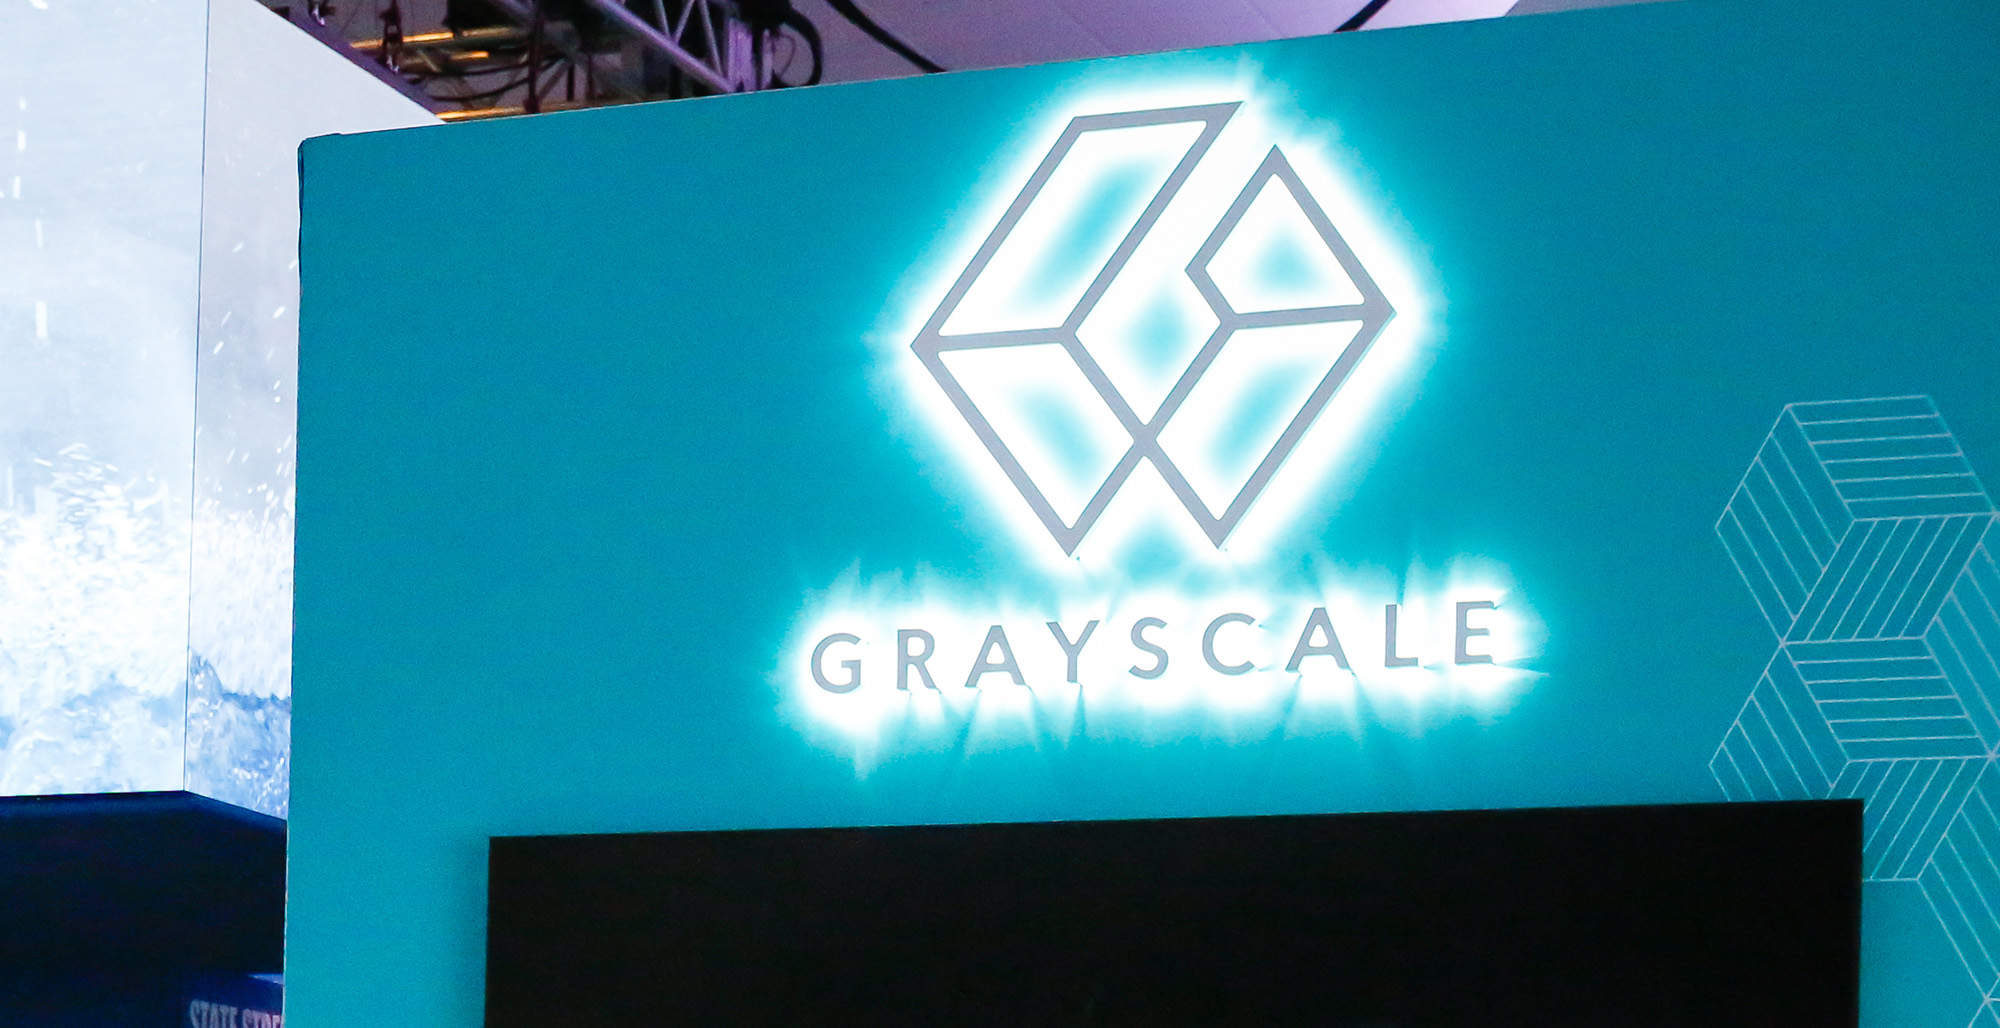 The Grayscale trust may be a source of frustration for many investors,&nbsp;&nbsp;but it’s the sturdiest pillar in Barry Silbert’s digital-asset&nbsp;empire.